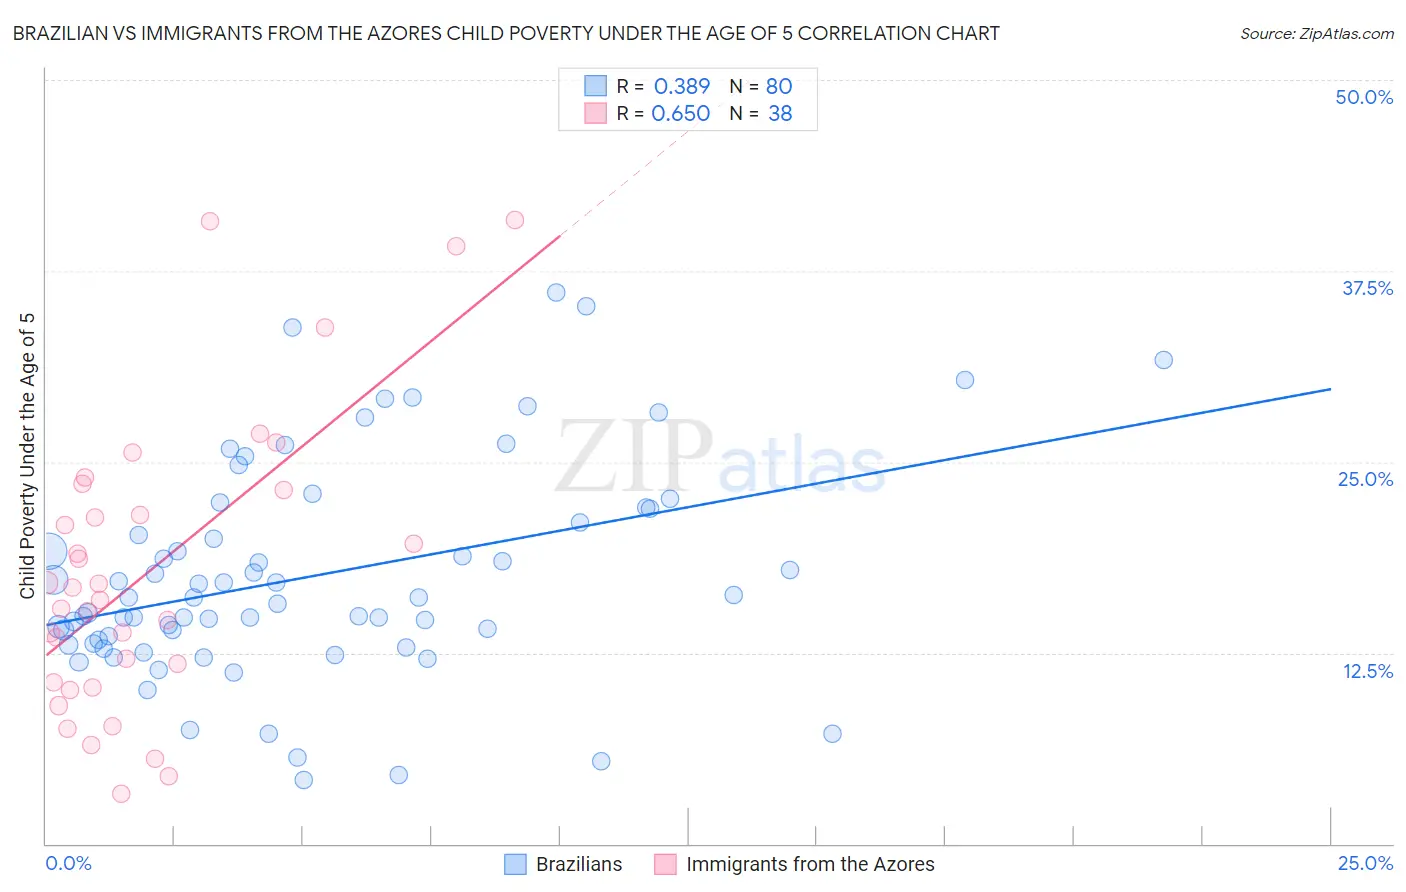 Brazilian vs Immigrants from the Azores Child Poverty Under the Age of 5